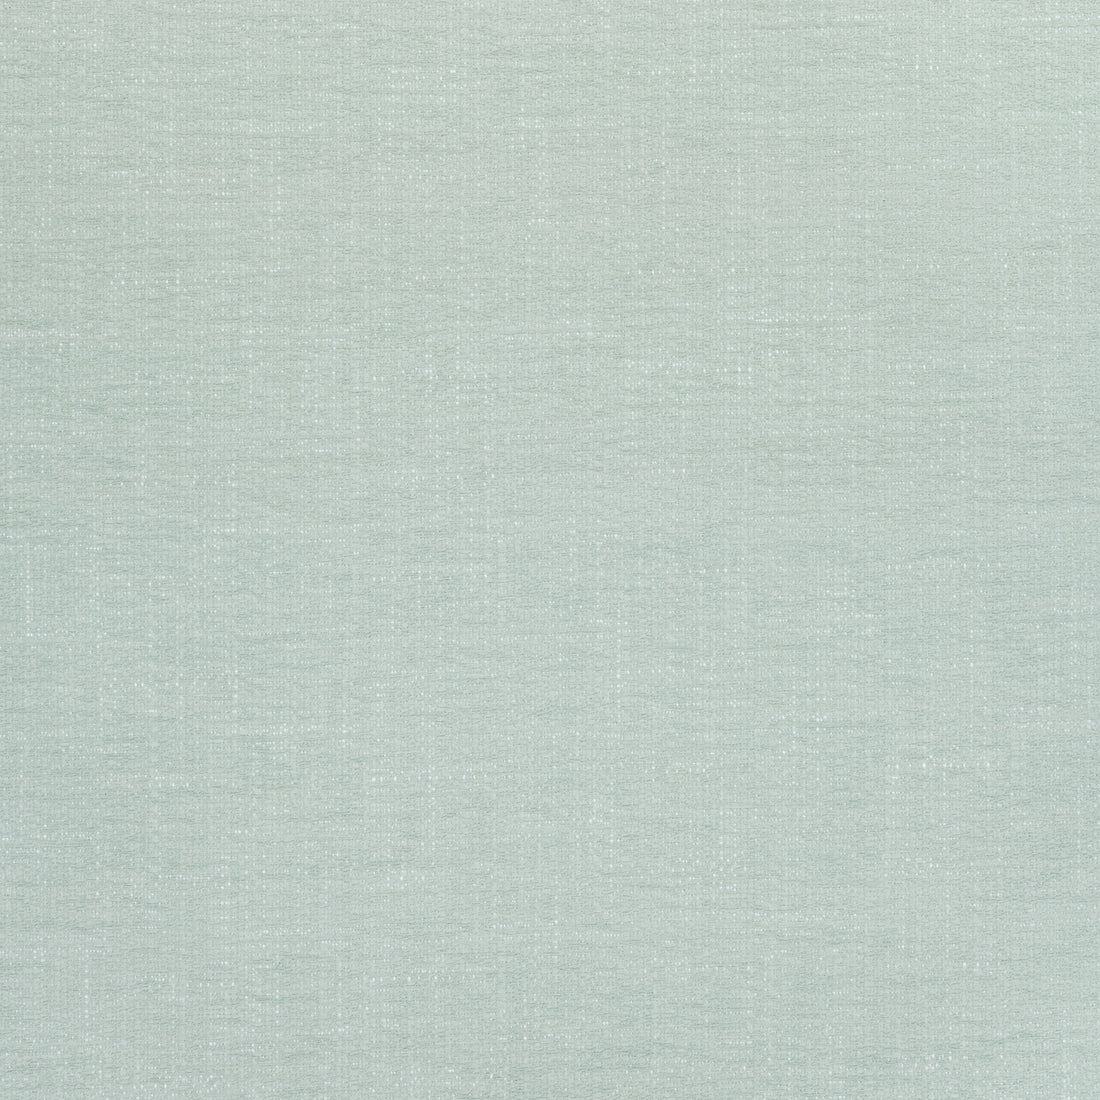 Vista fabric in mist color - pattern number W73387 - by Thibaut in the Landmark Textures collection